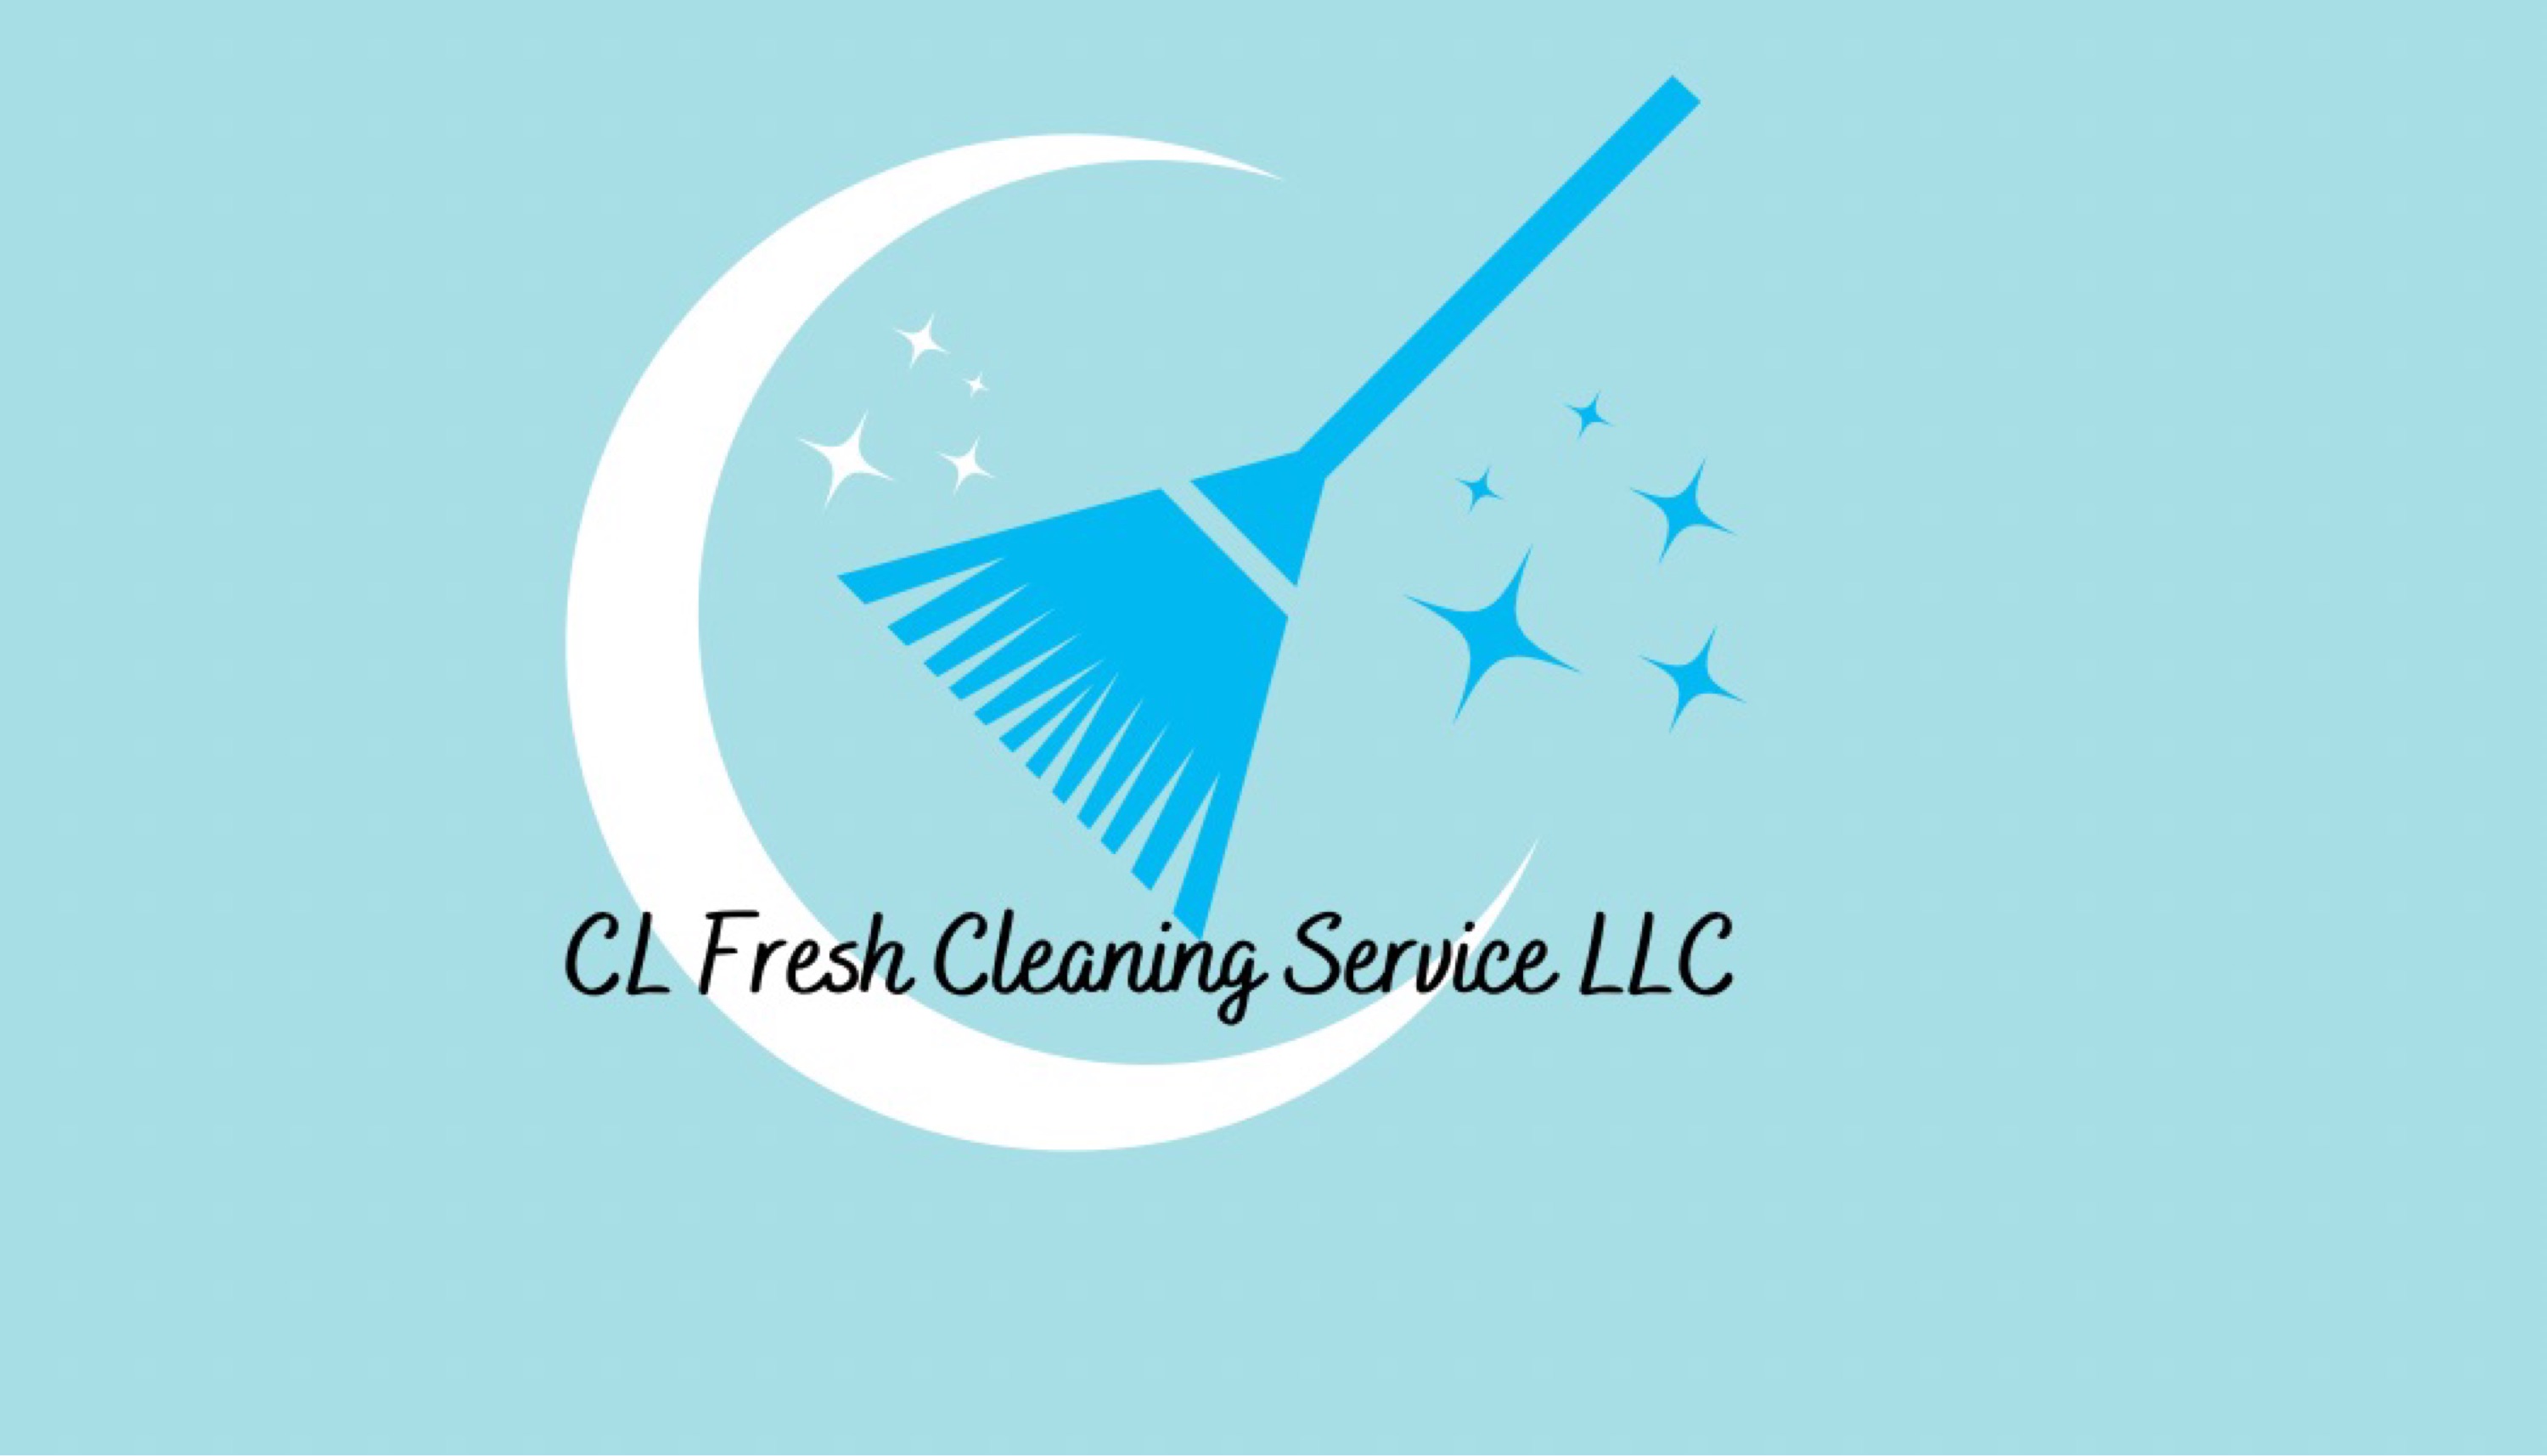 CL Fresh Cleaning Services Logo